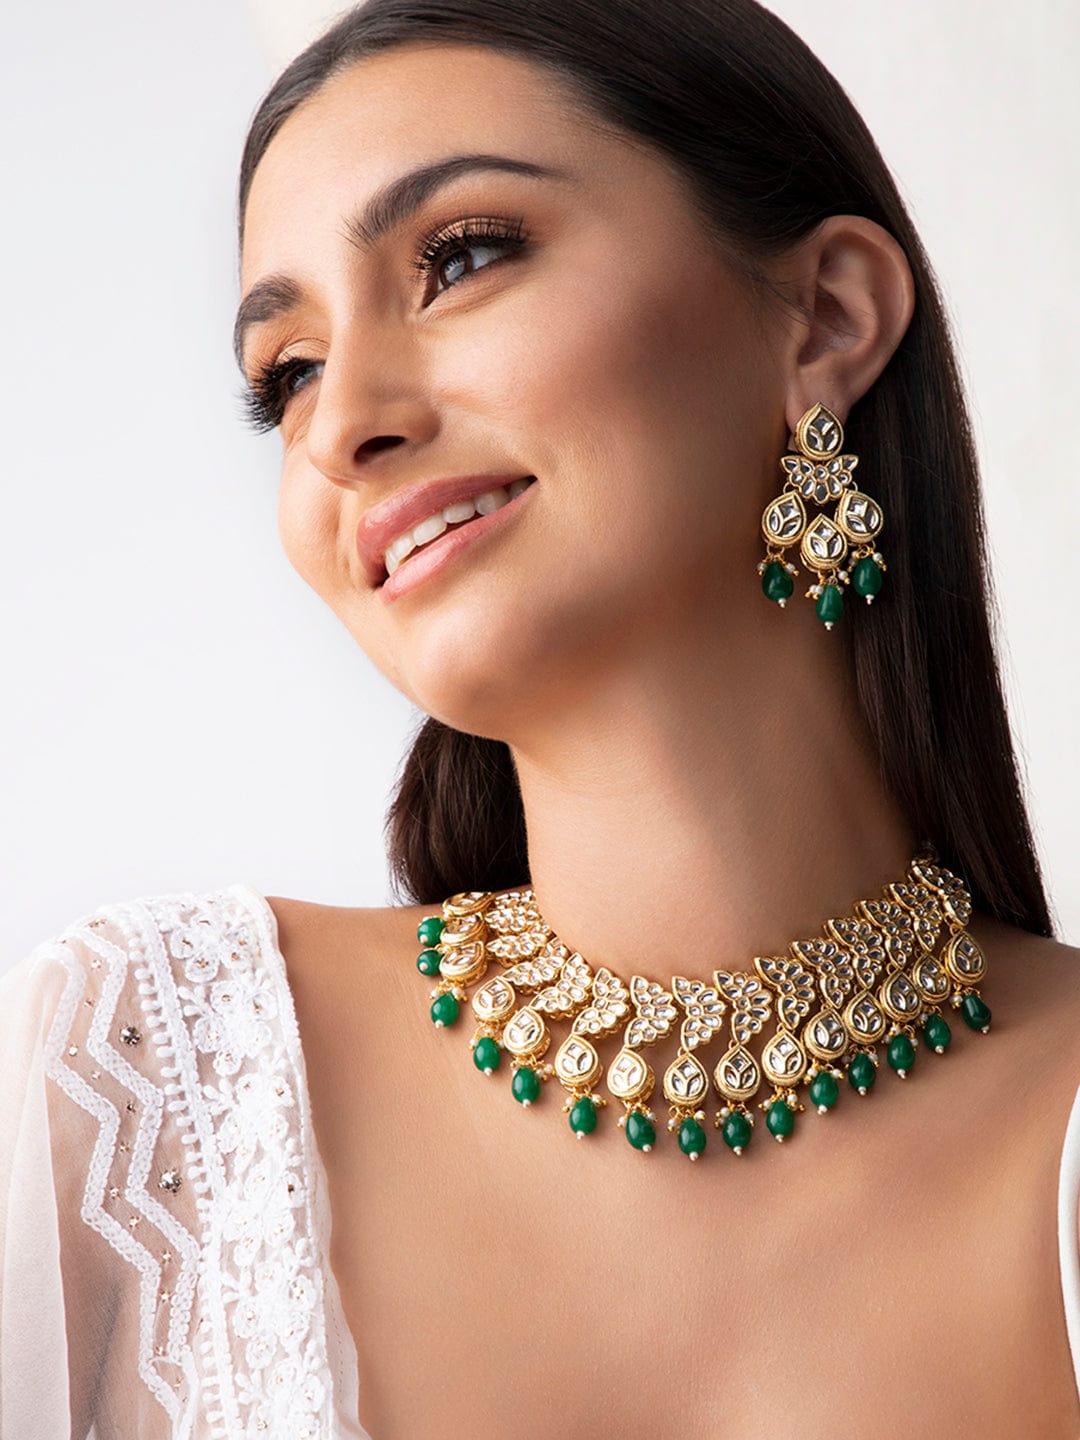 Rubans 22K Gold Plated Kundan Necklace Set With And Green Beads Necklace Set